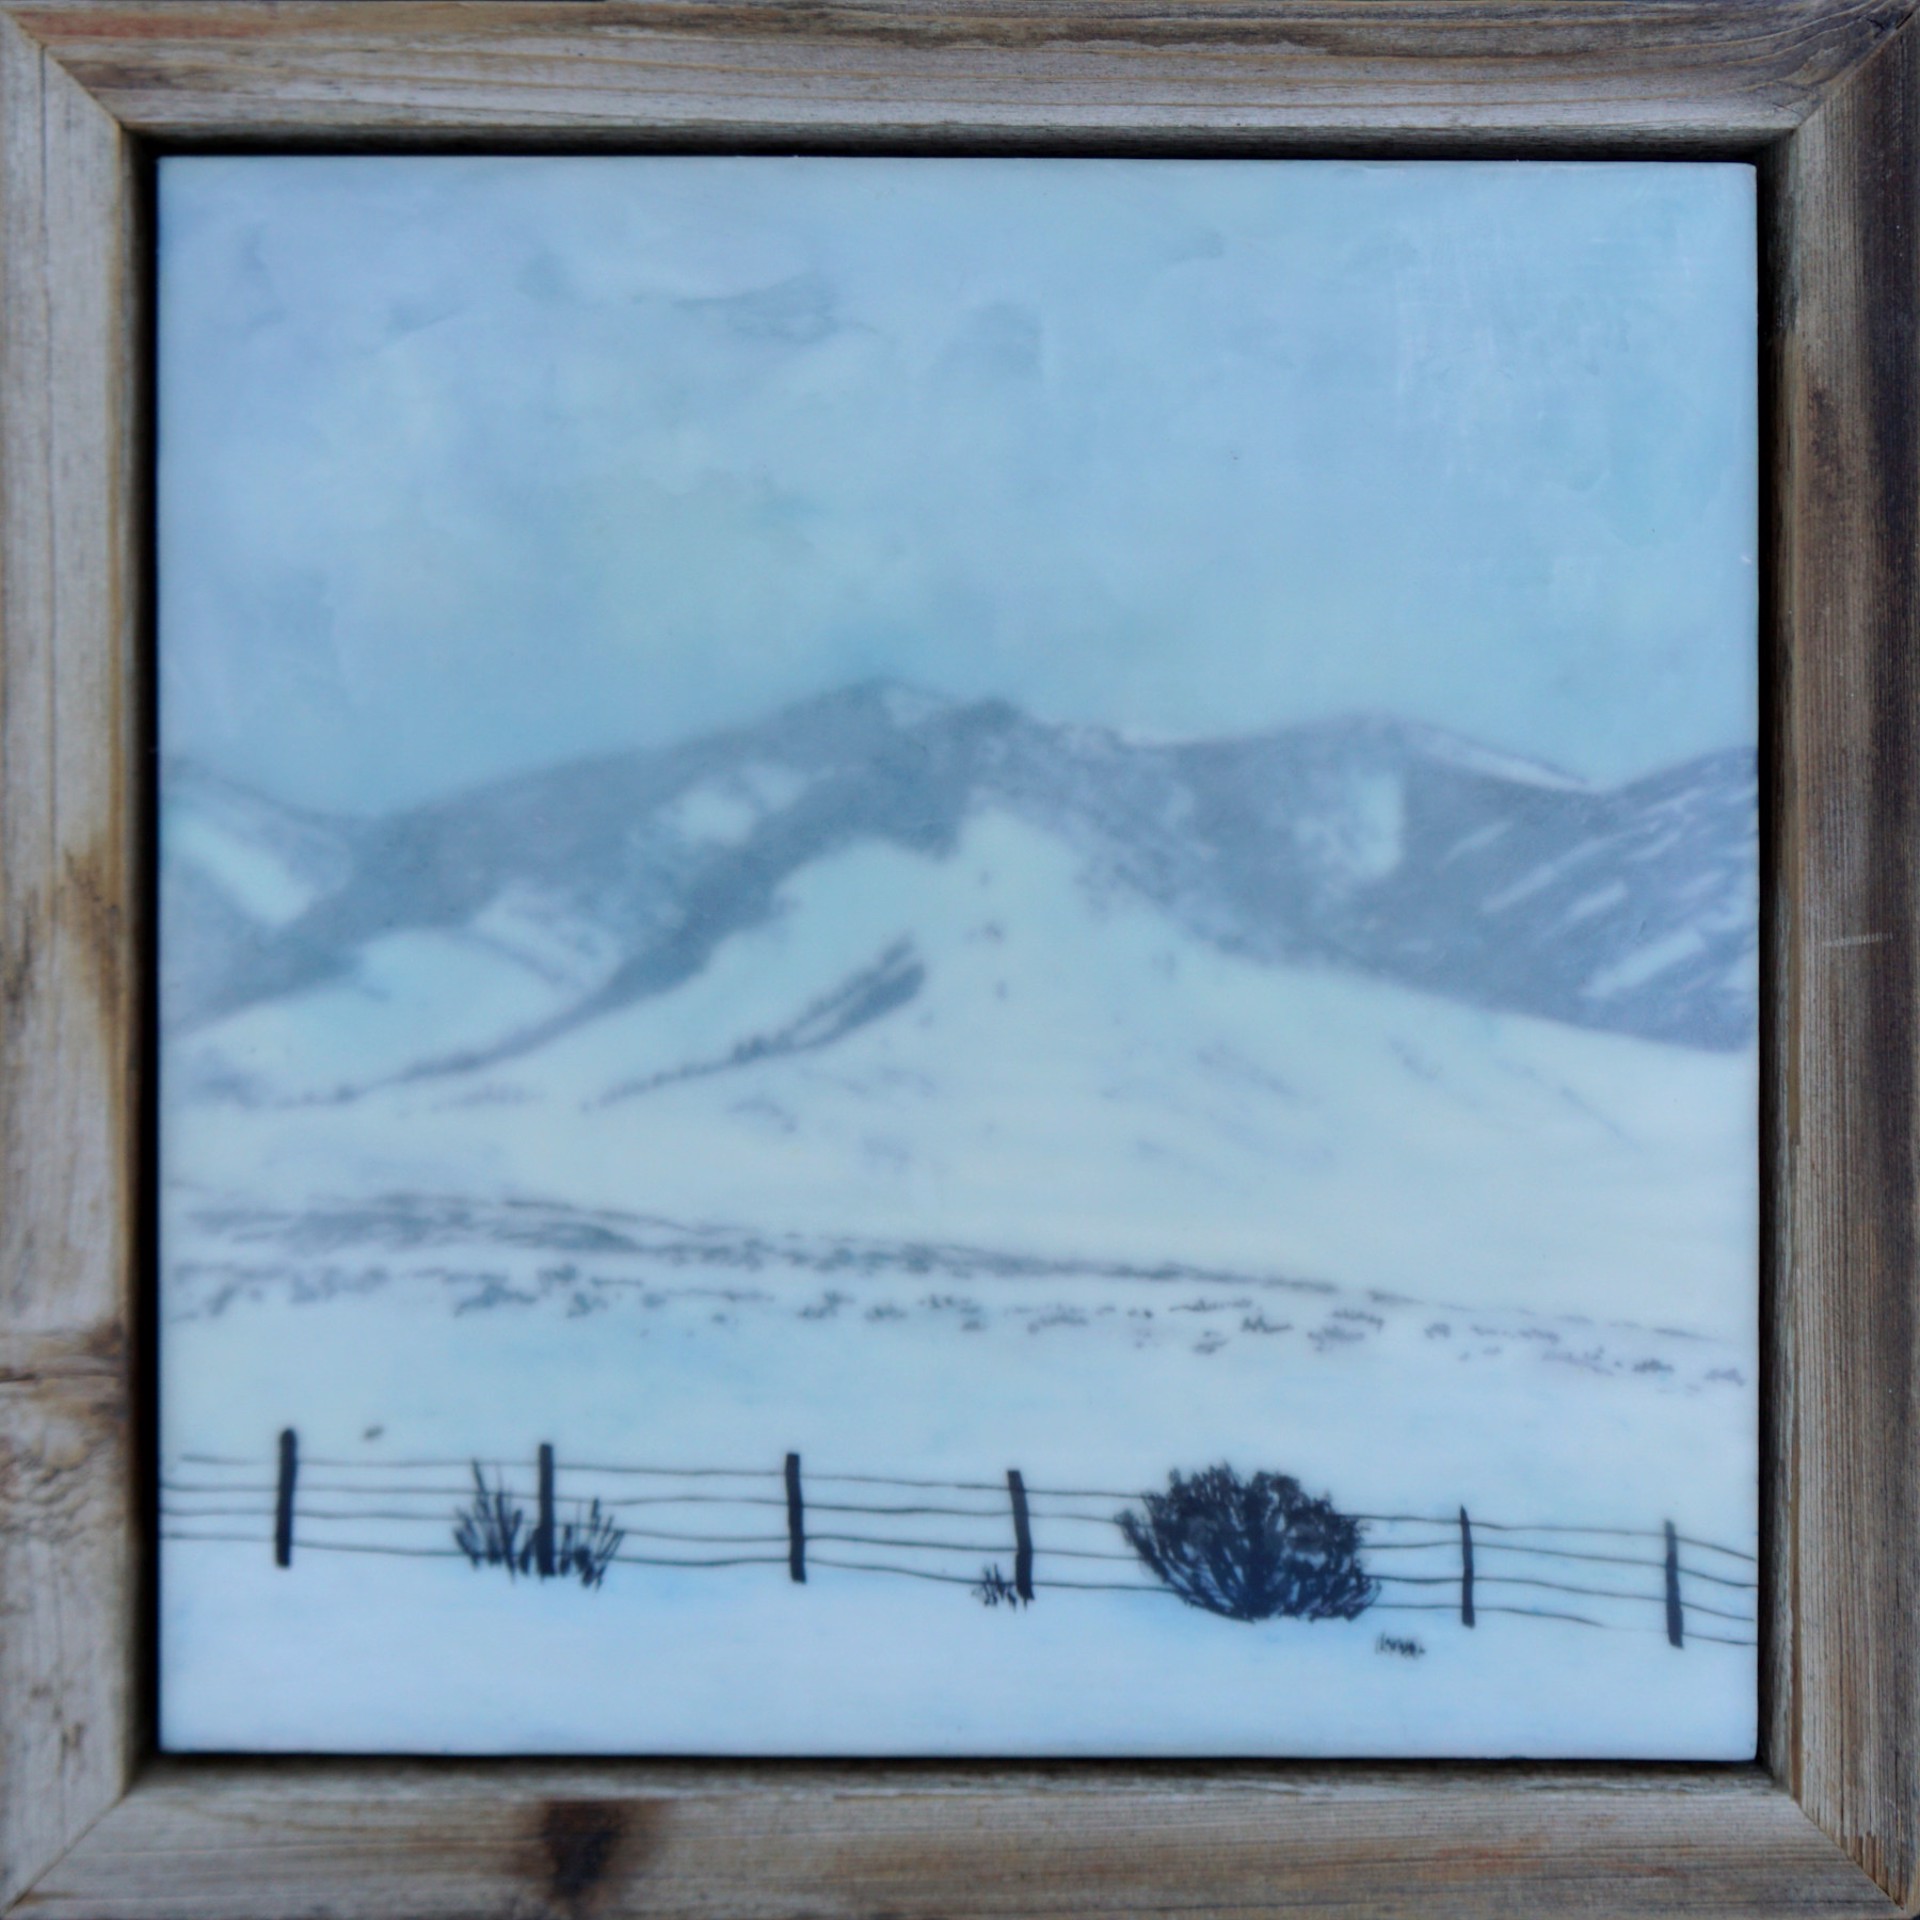 An Original Encaustic And Milk Paint Painting Of A Misty Snow Covered Field With A Wire Fence In The Foreground And Misty Mountains Behind Lands, By Bridgette Meinhold